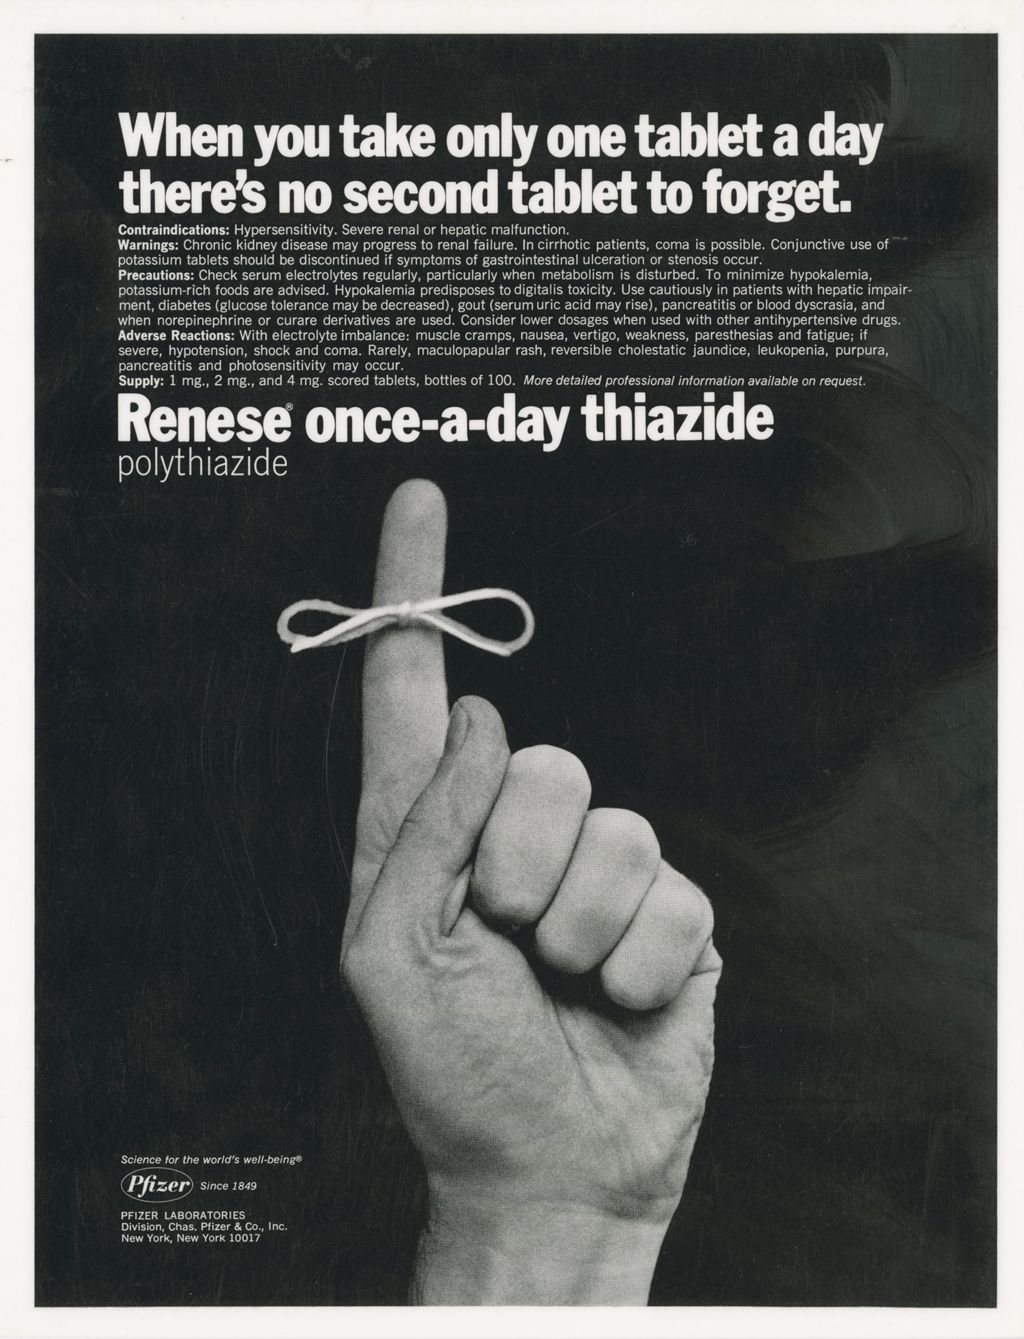 Miniature of Advertisement for Renese once-a-day thiazide